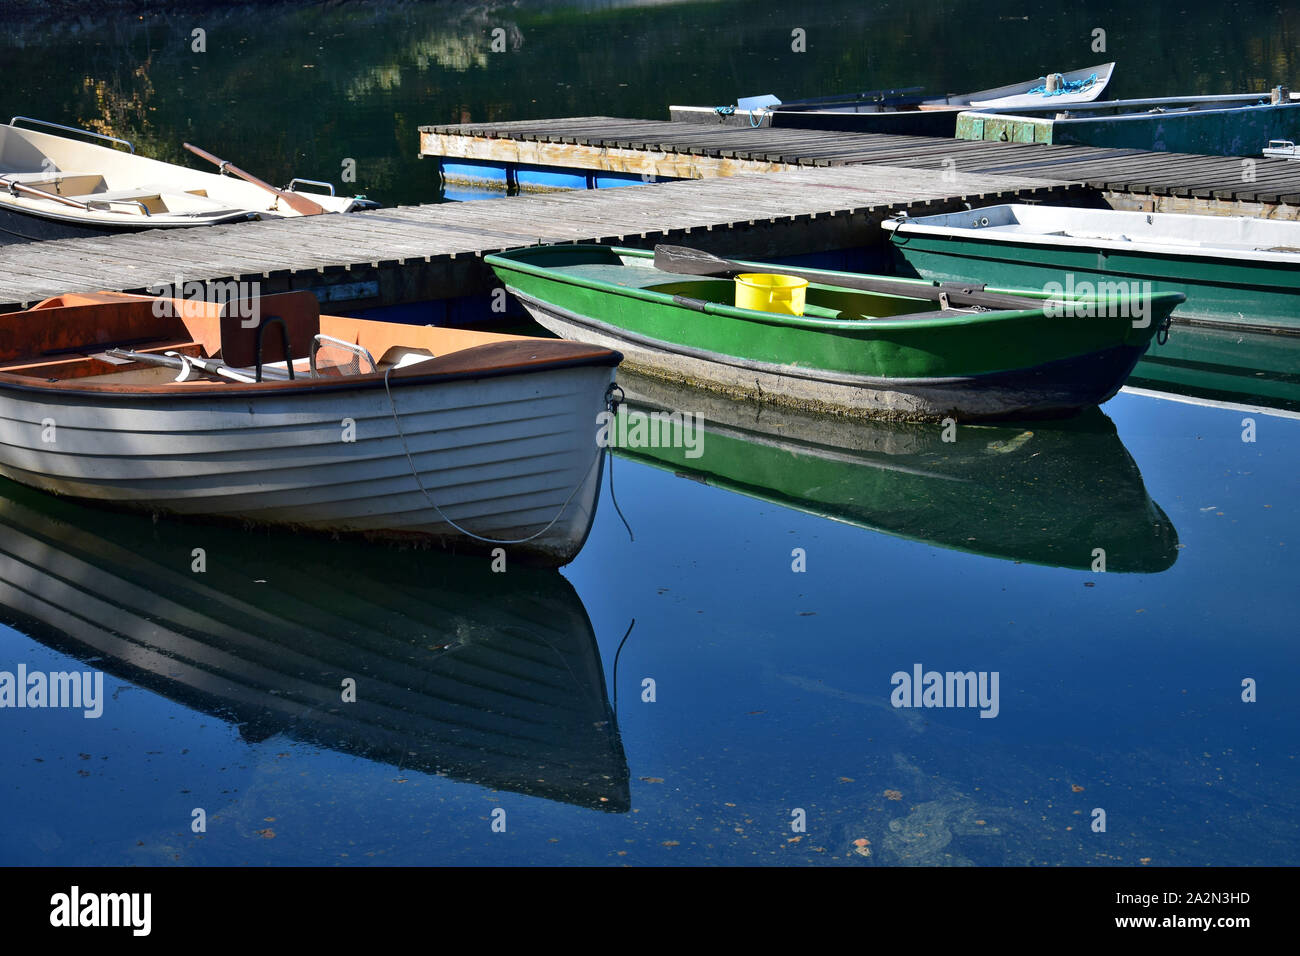 Some angler boats of different colors in a lake, reflecting in the water. Stock Photo